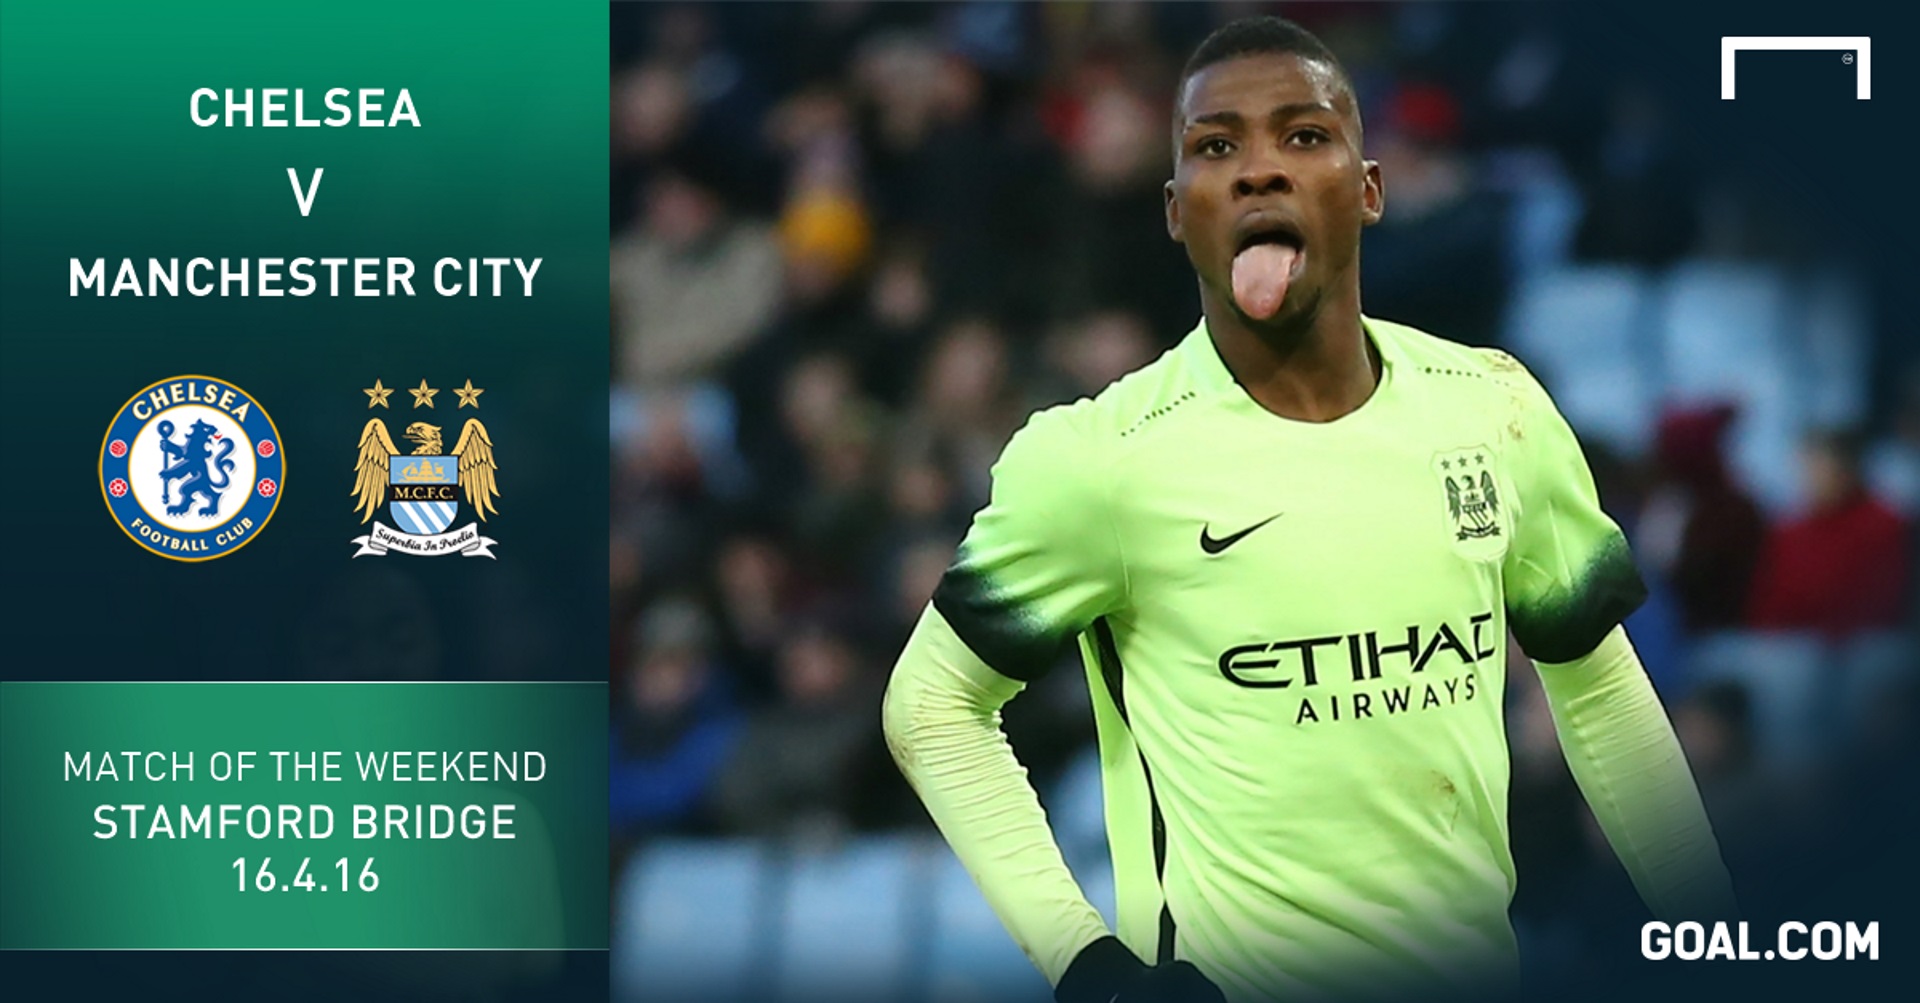 Chelsea Man City: Match of the Weekend | Goal.com